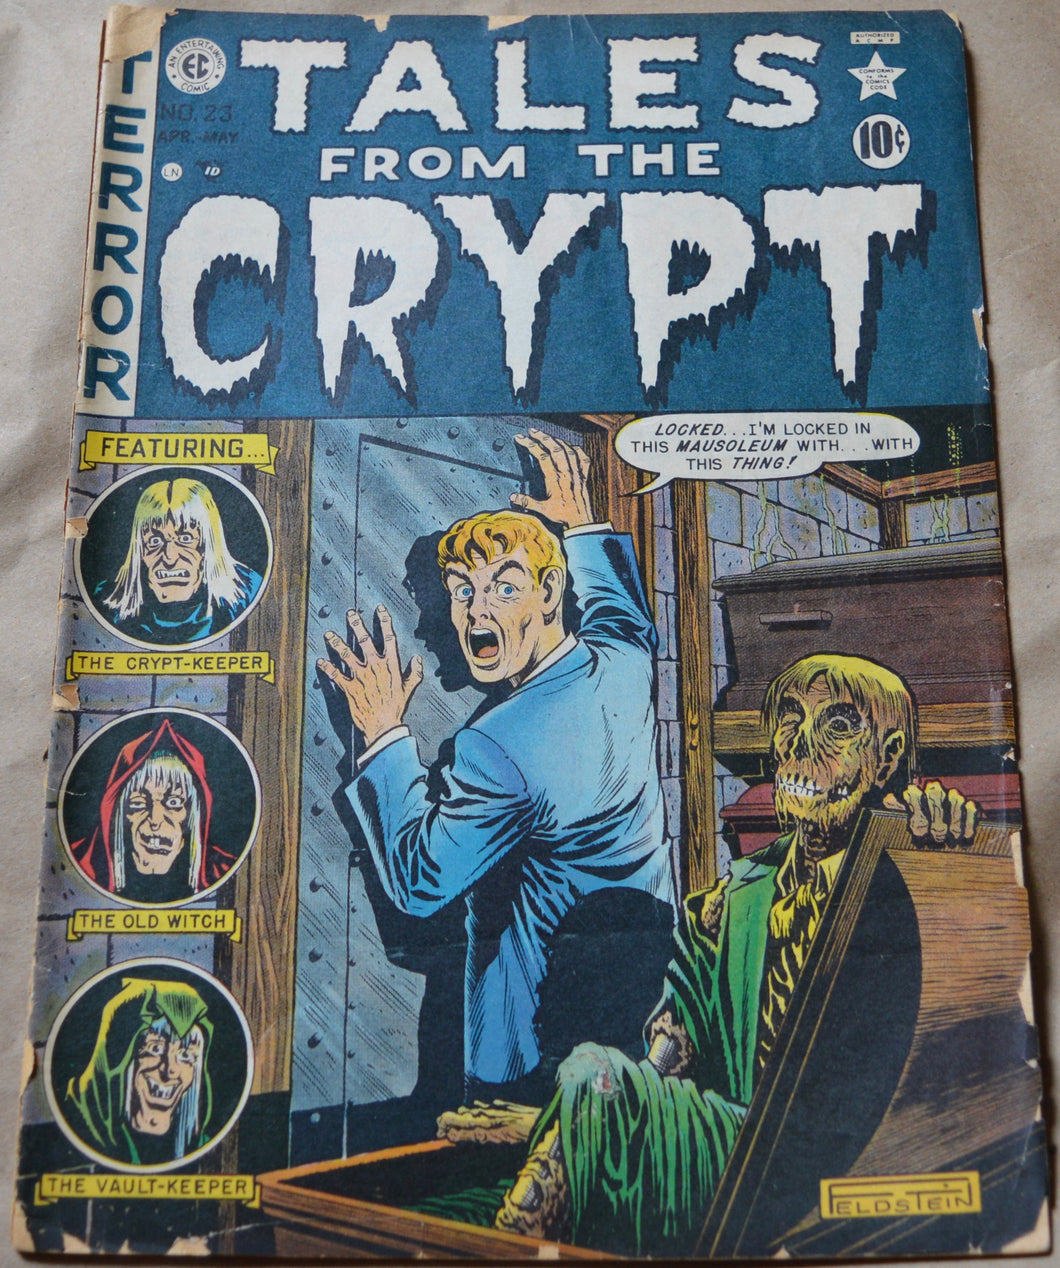 TALES FROM THE CRYPT #23 (EC, 1951) classic Feldstein cover. GOLDEN AGE HORROR